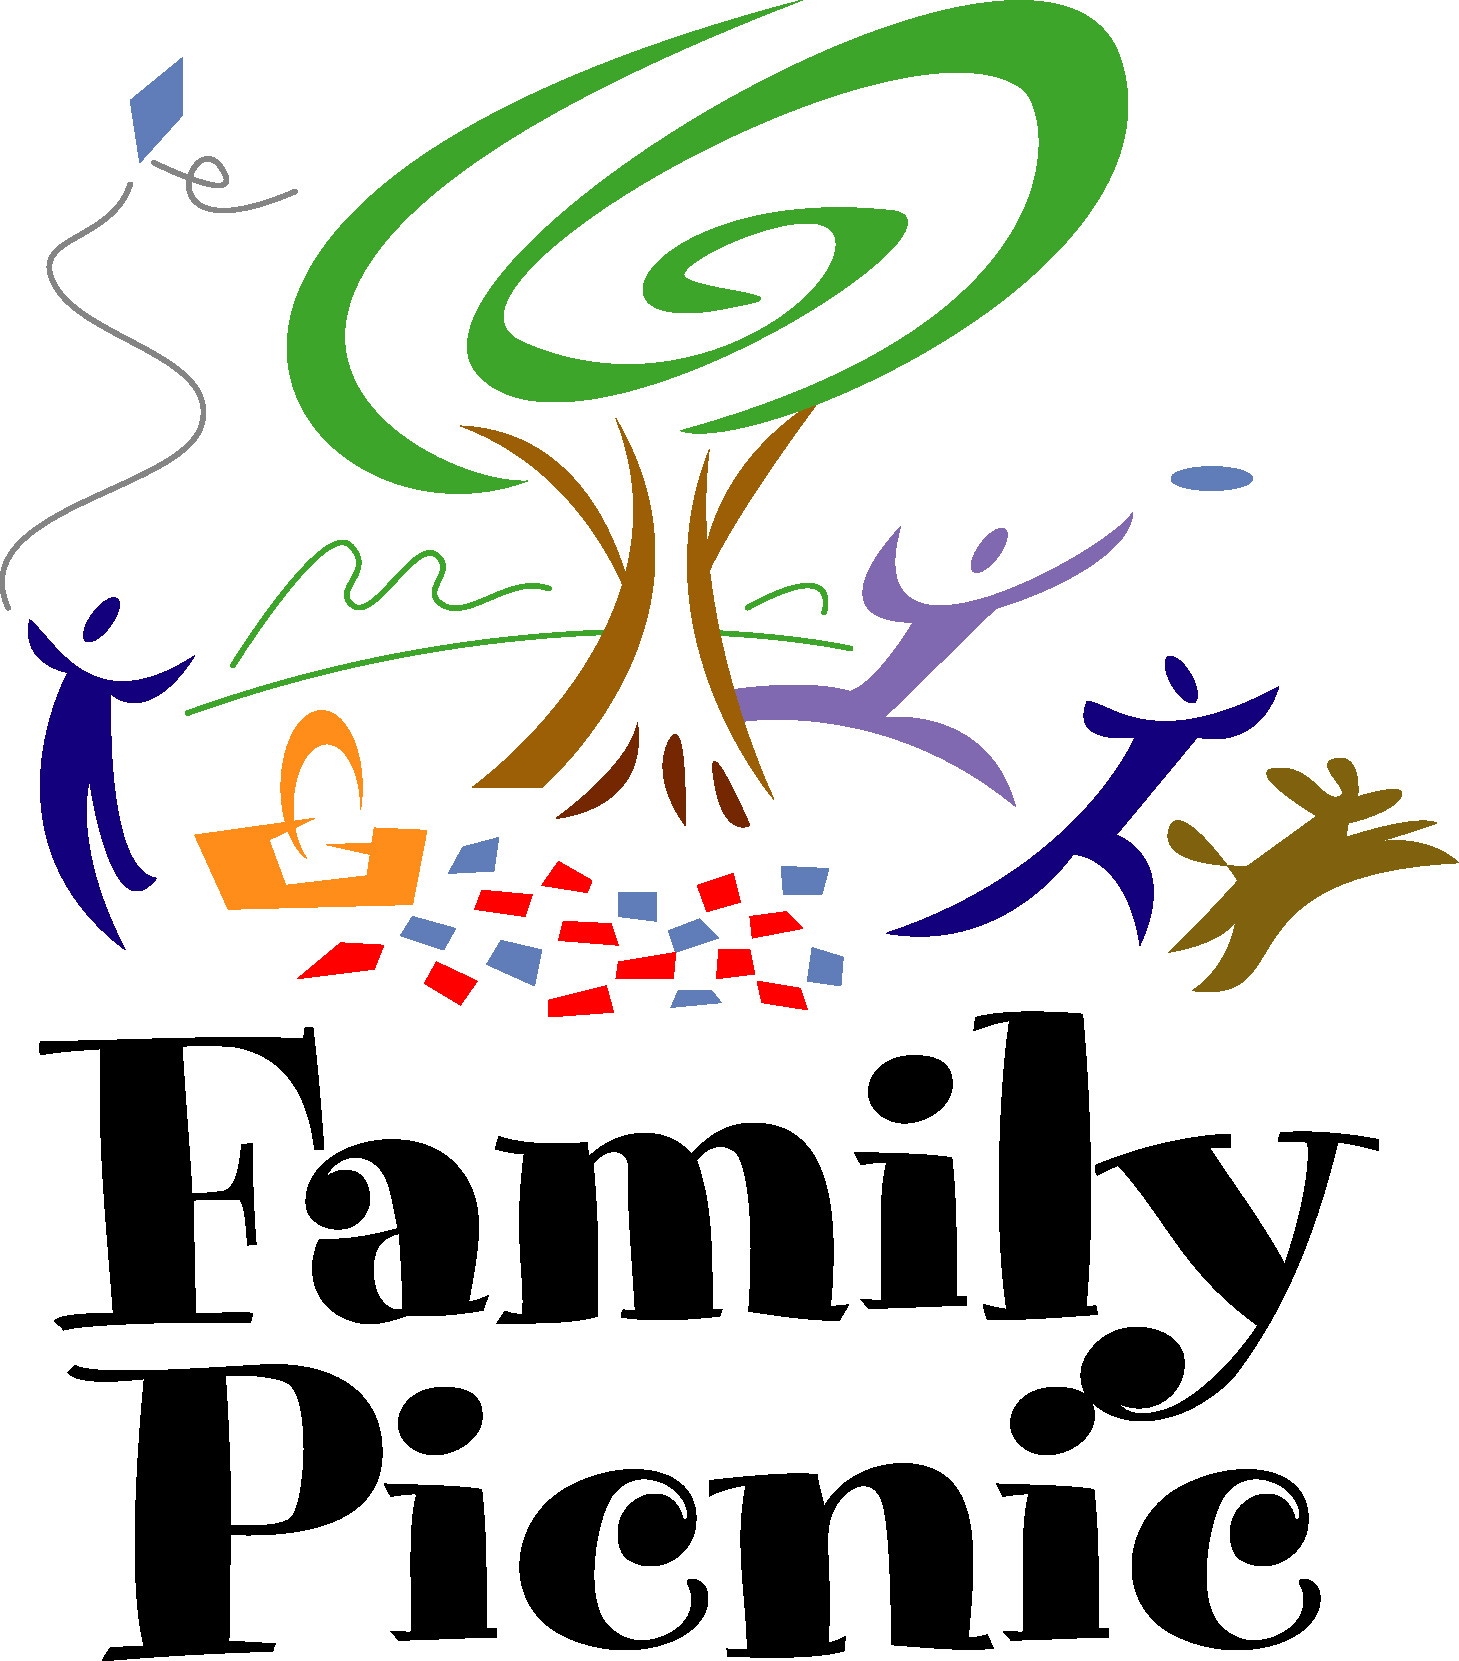 Picnic Clip Art Black And White   Clipart Panda   Free Clipart Images